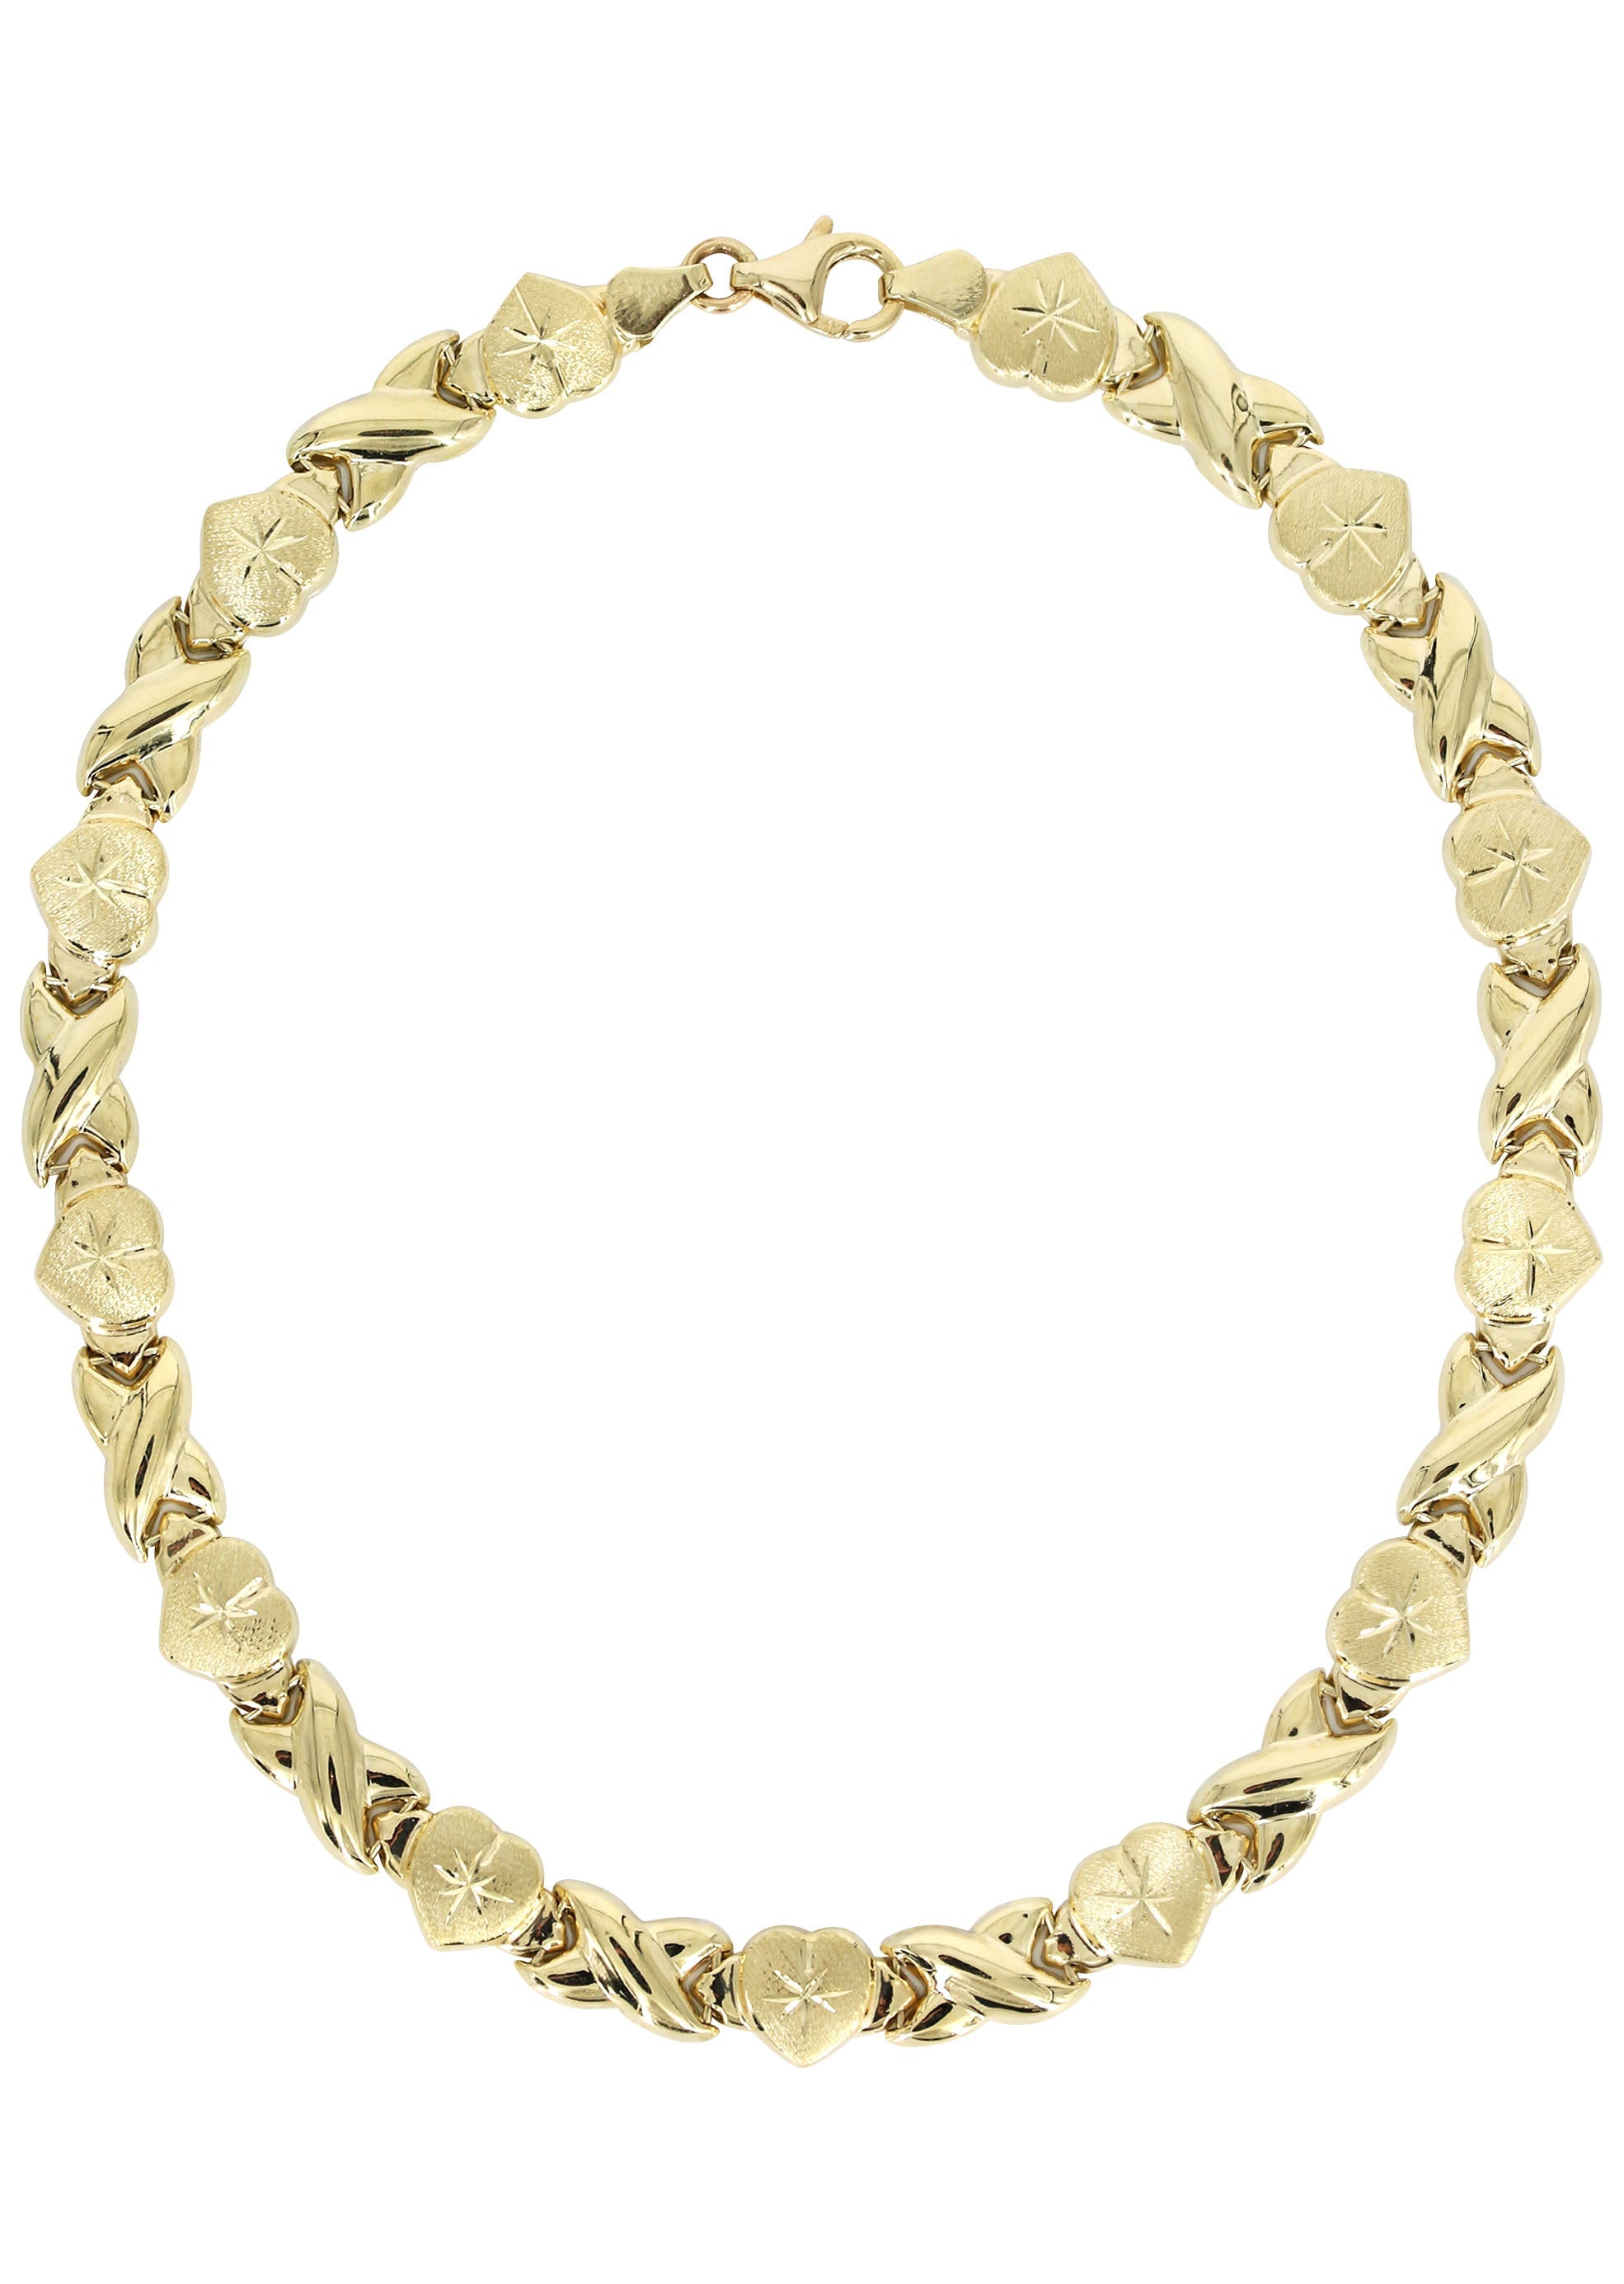 Bloomingdale's XOXO Collar Necklace in 14K Yellow Gold, 17